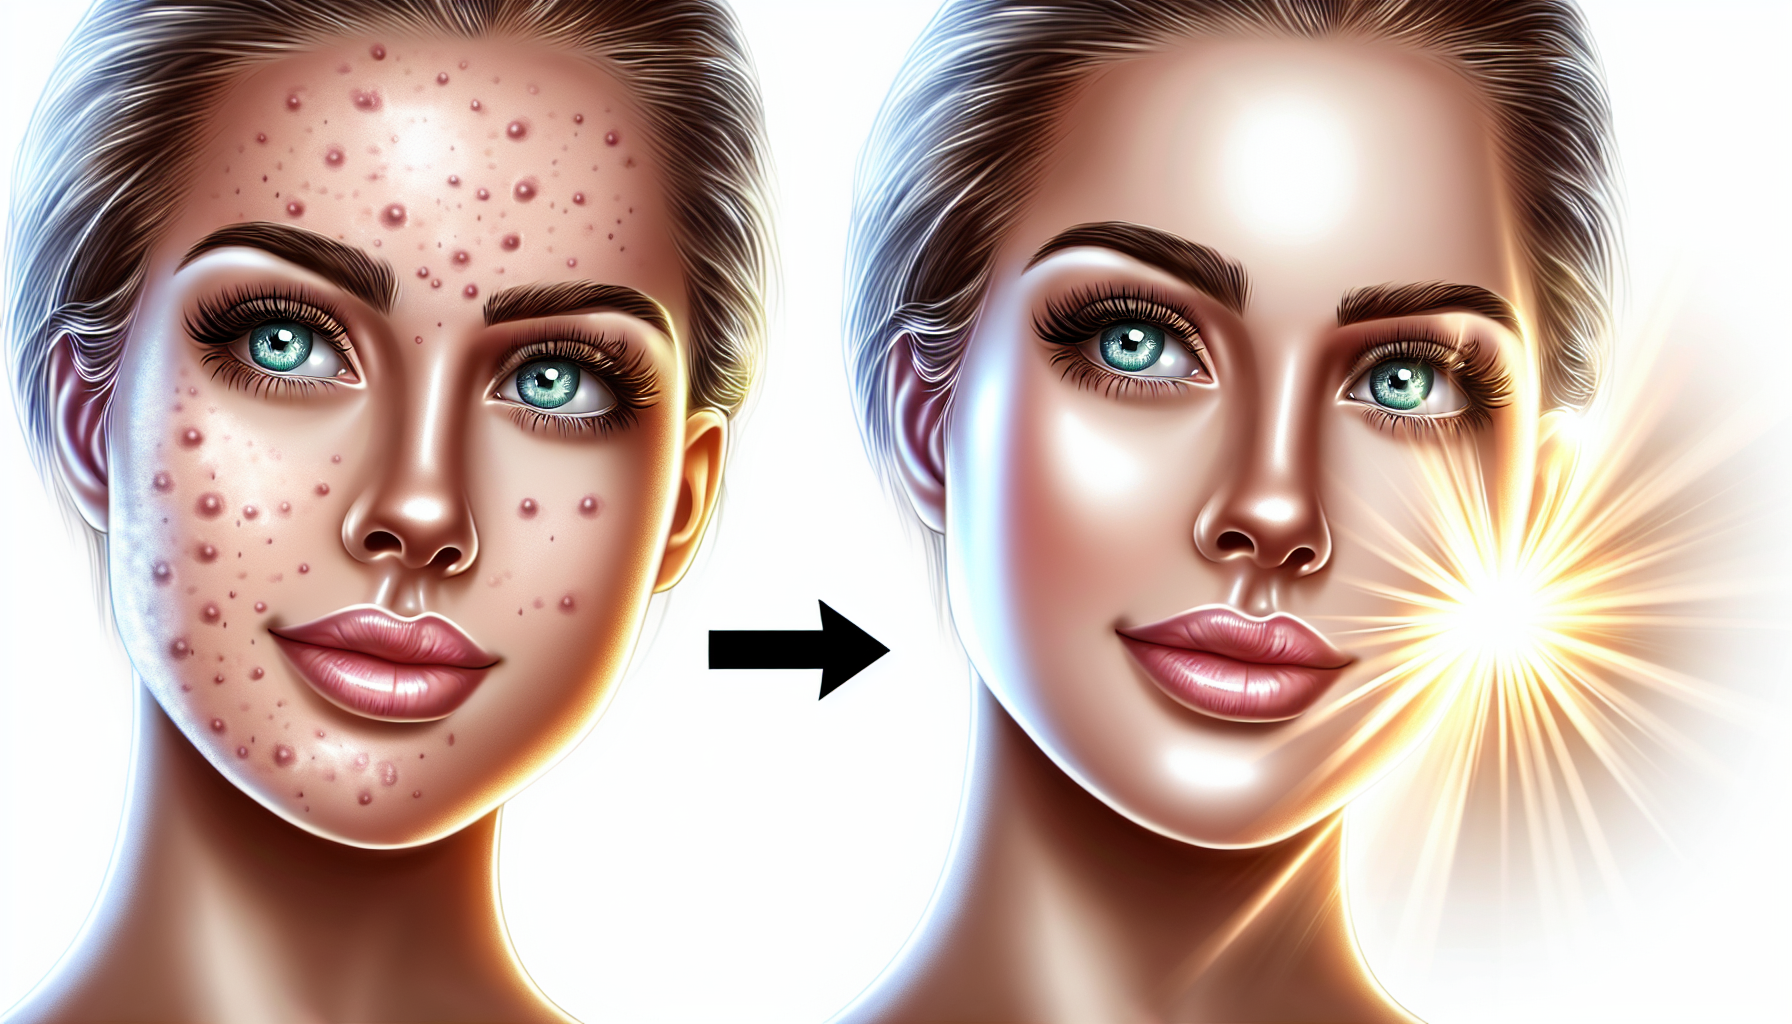 Illustration of clear skin with reduced acne after using bison tallow